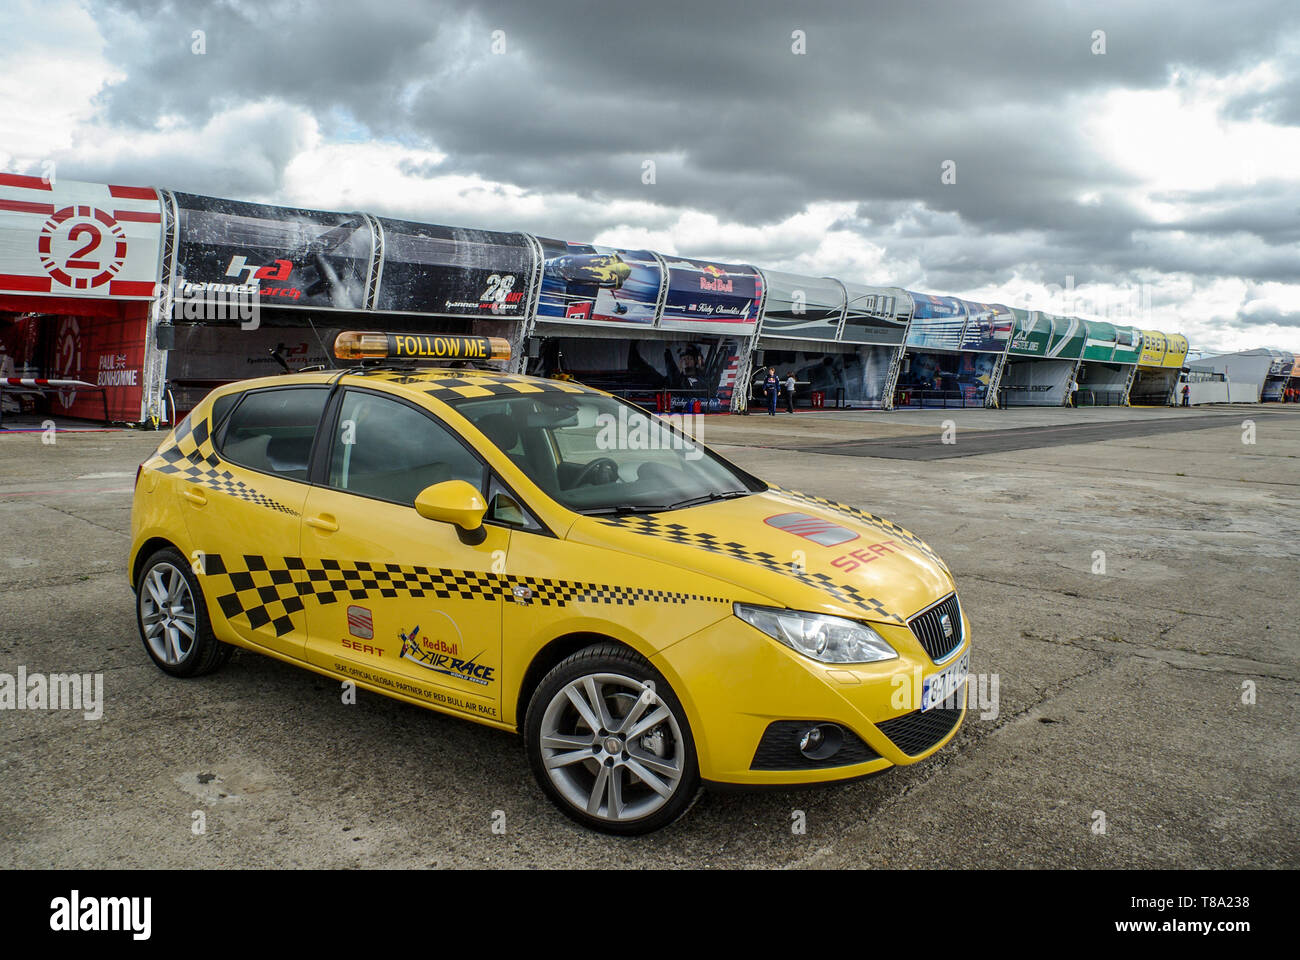 Seat Ibiza Follow Me car at the Red Bull Air Race pits with race plane hangars beyond with planes. London round of the air race series. Sponsorship Stock Photo